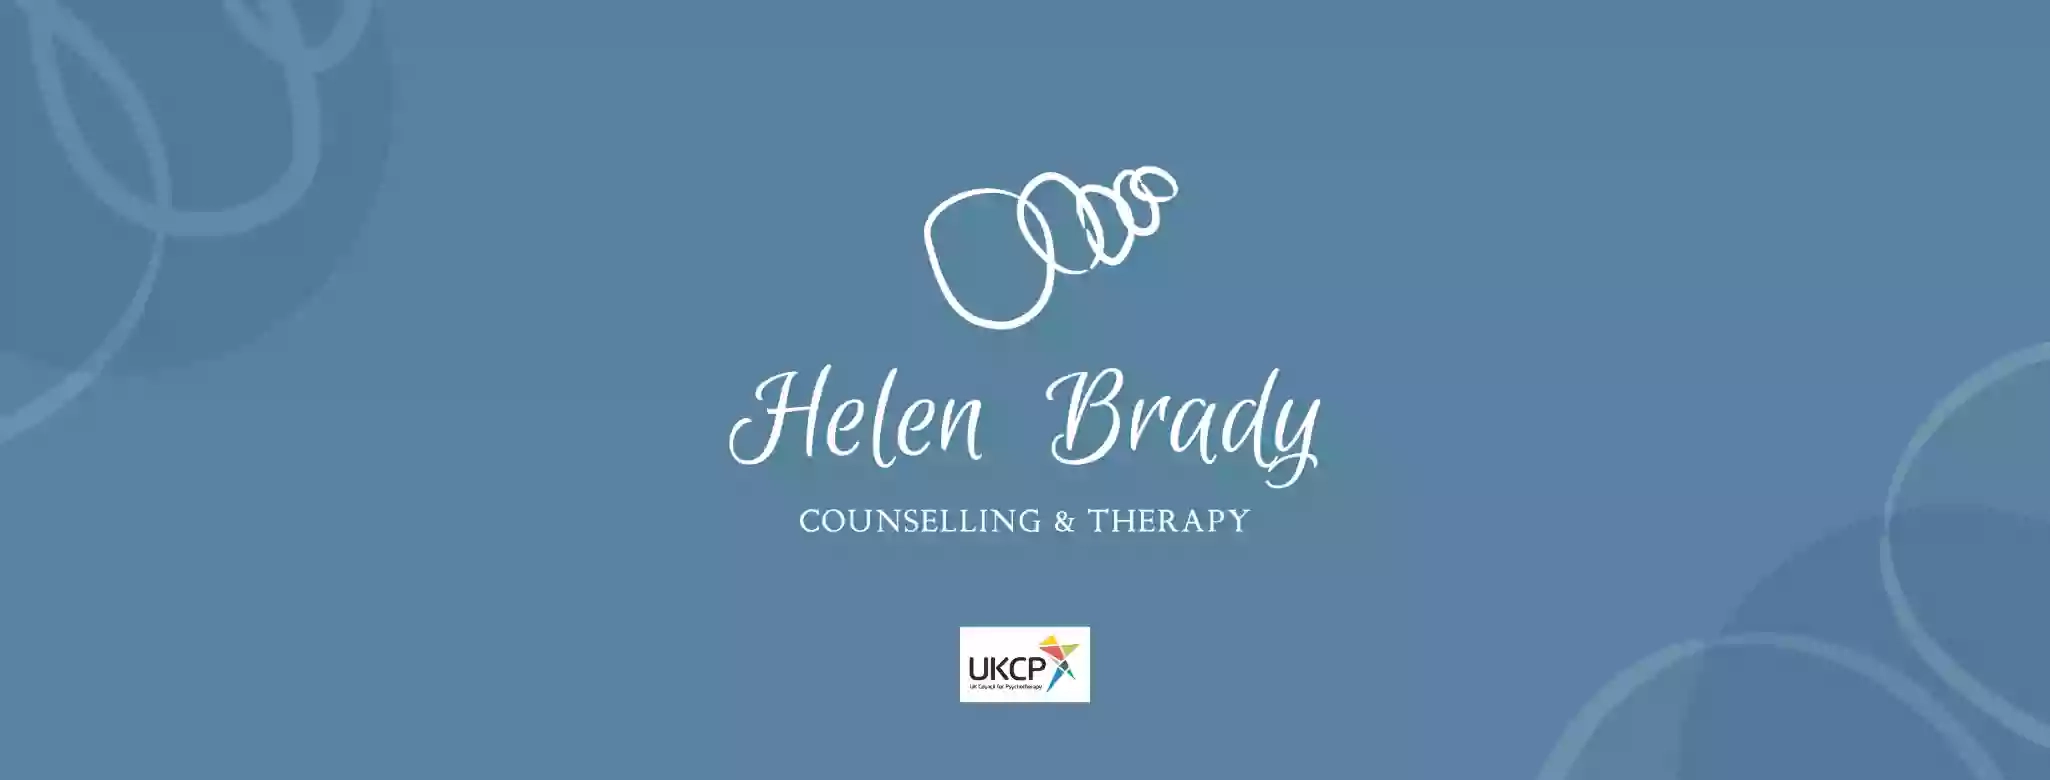 Helen Brady - Counselling and therapy in Market Weighton